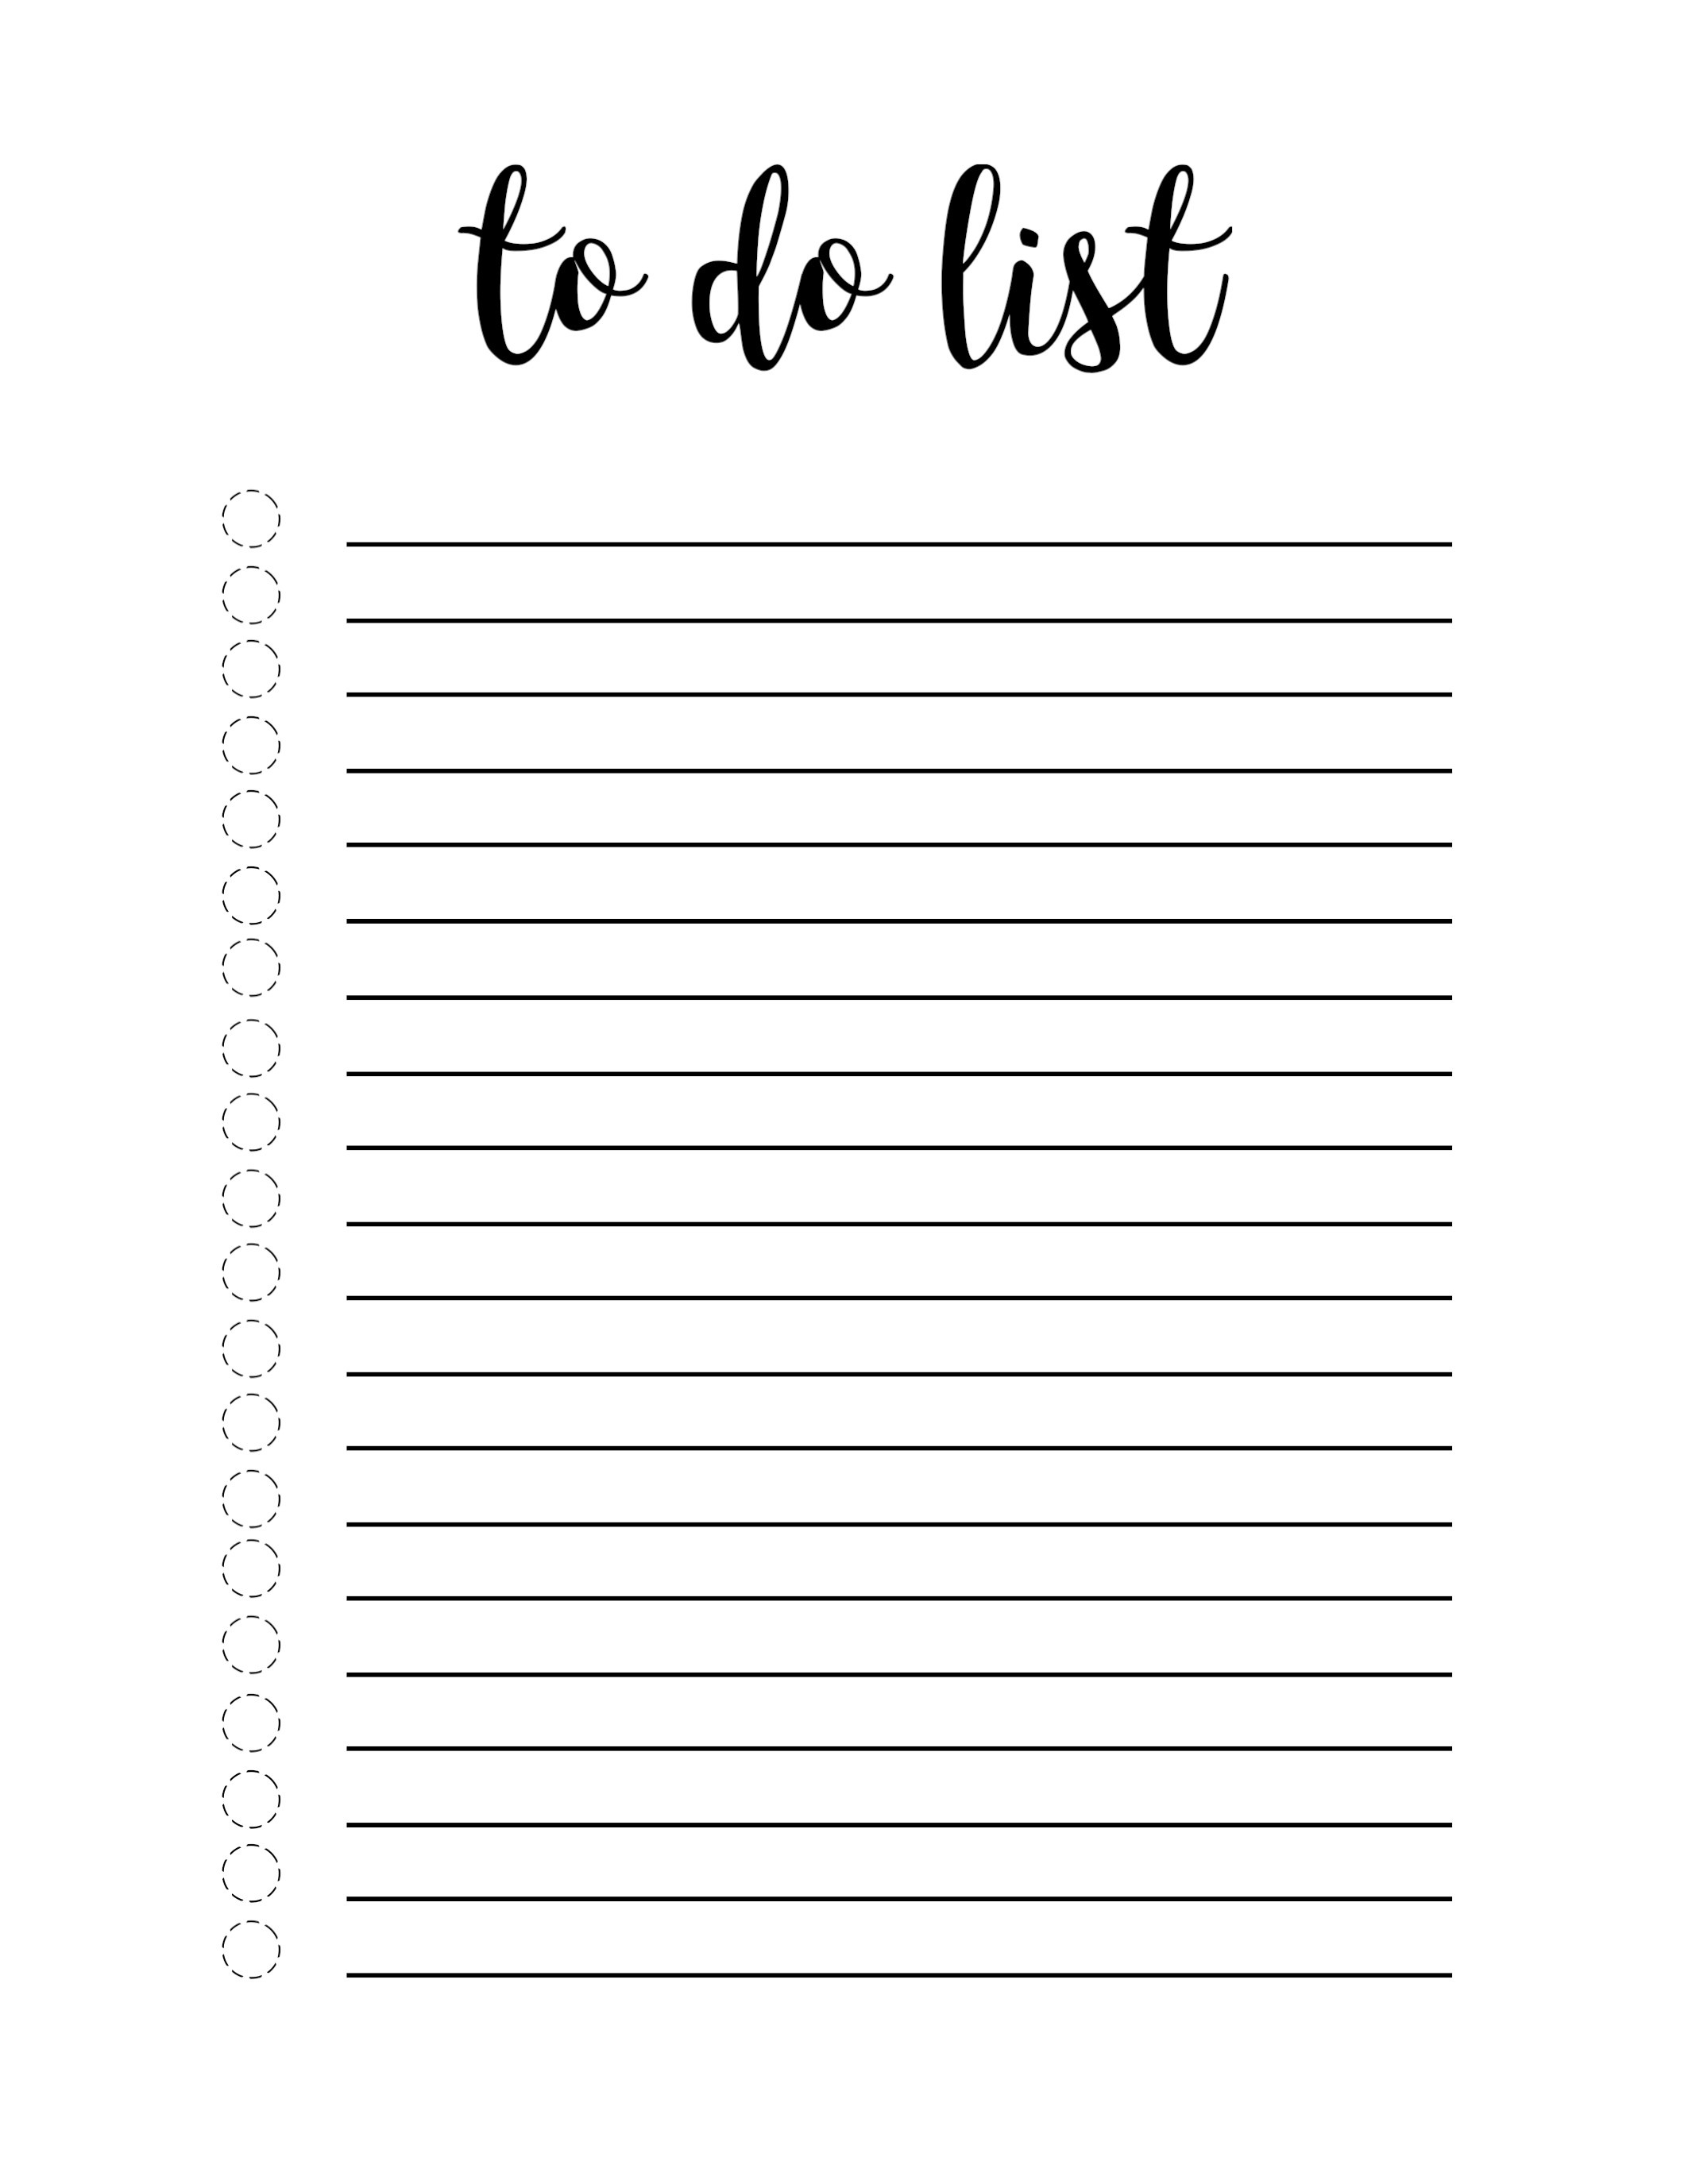 Free Printable To Do List Template - Paper Trail Design - Free Printable To Do Lists To Get Organized